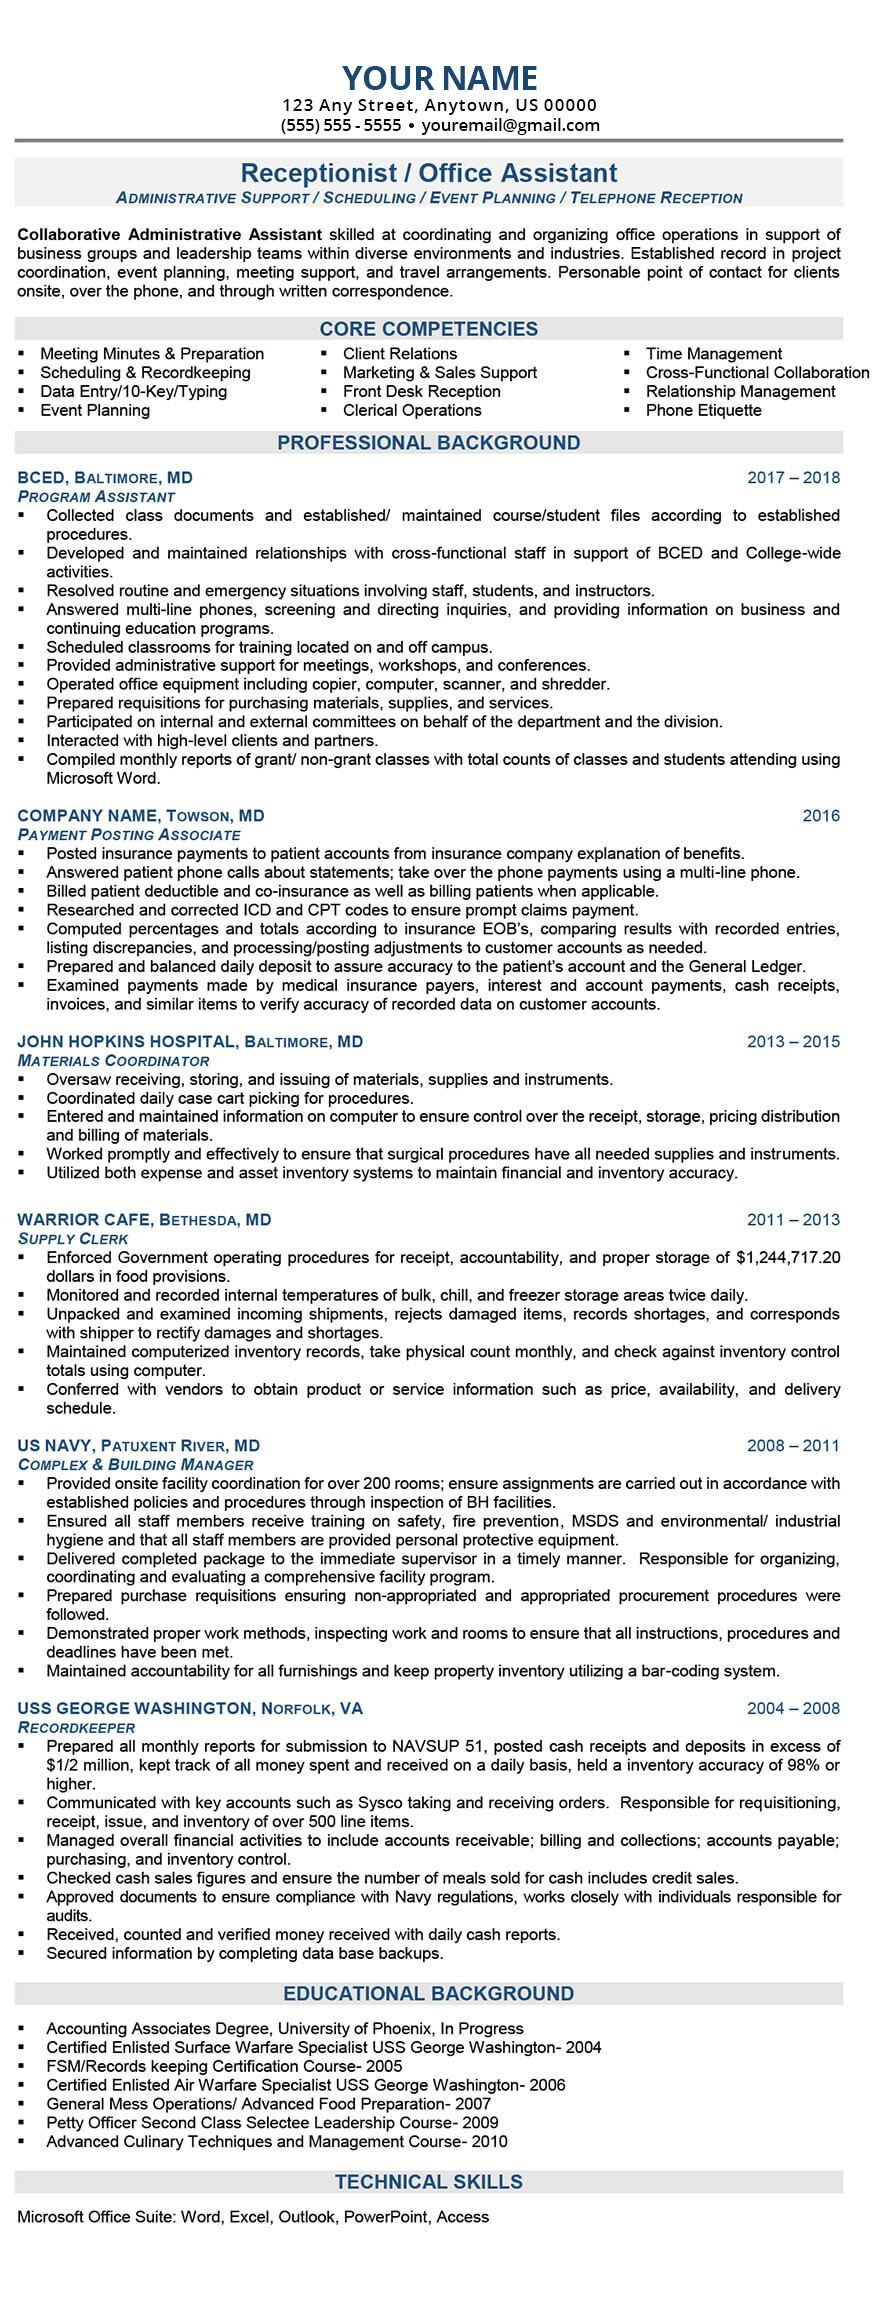 Sample Resume with Onsite Work Experience Resume Cover Letter Examples – Ryno Resumes, ,